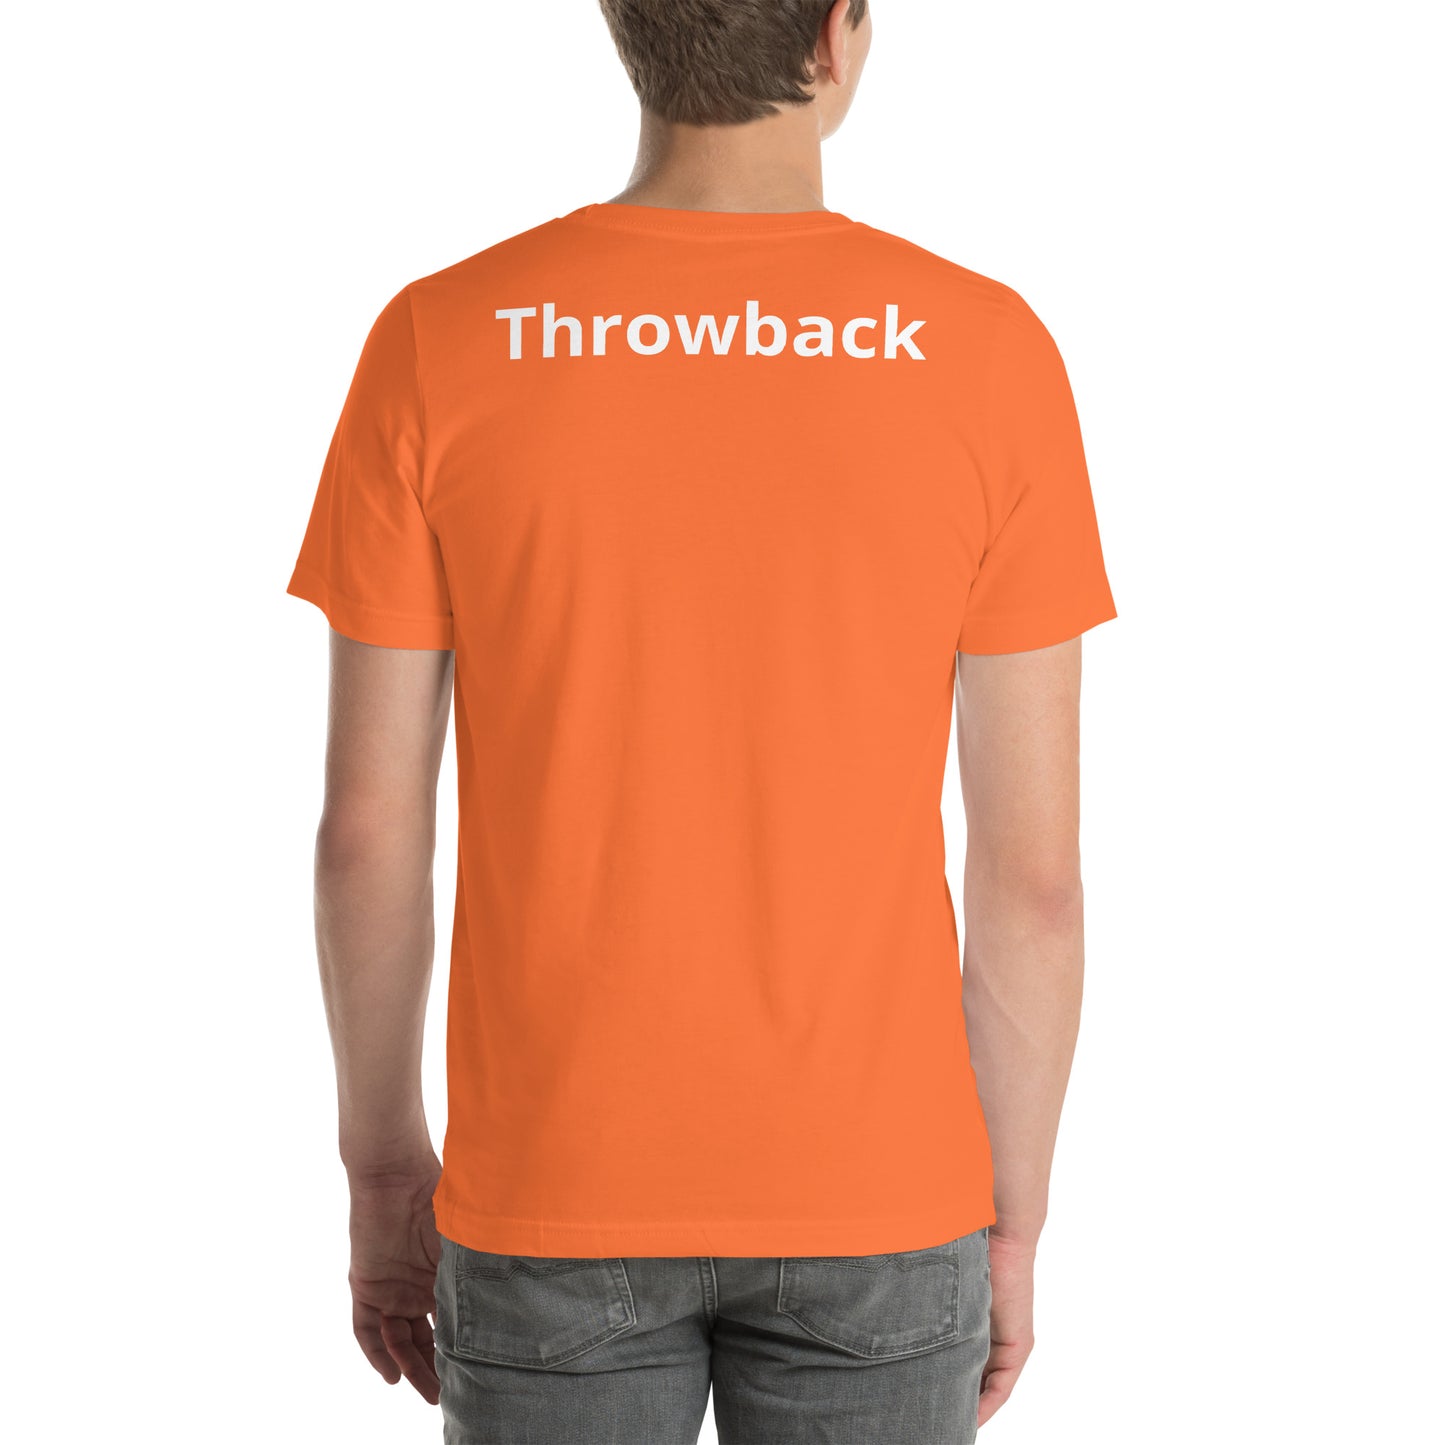 Orange college bar T-shirt with "Throwback" written on the back.